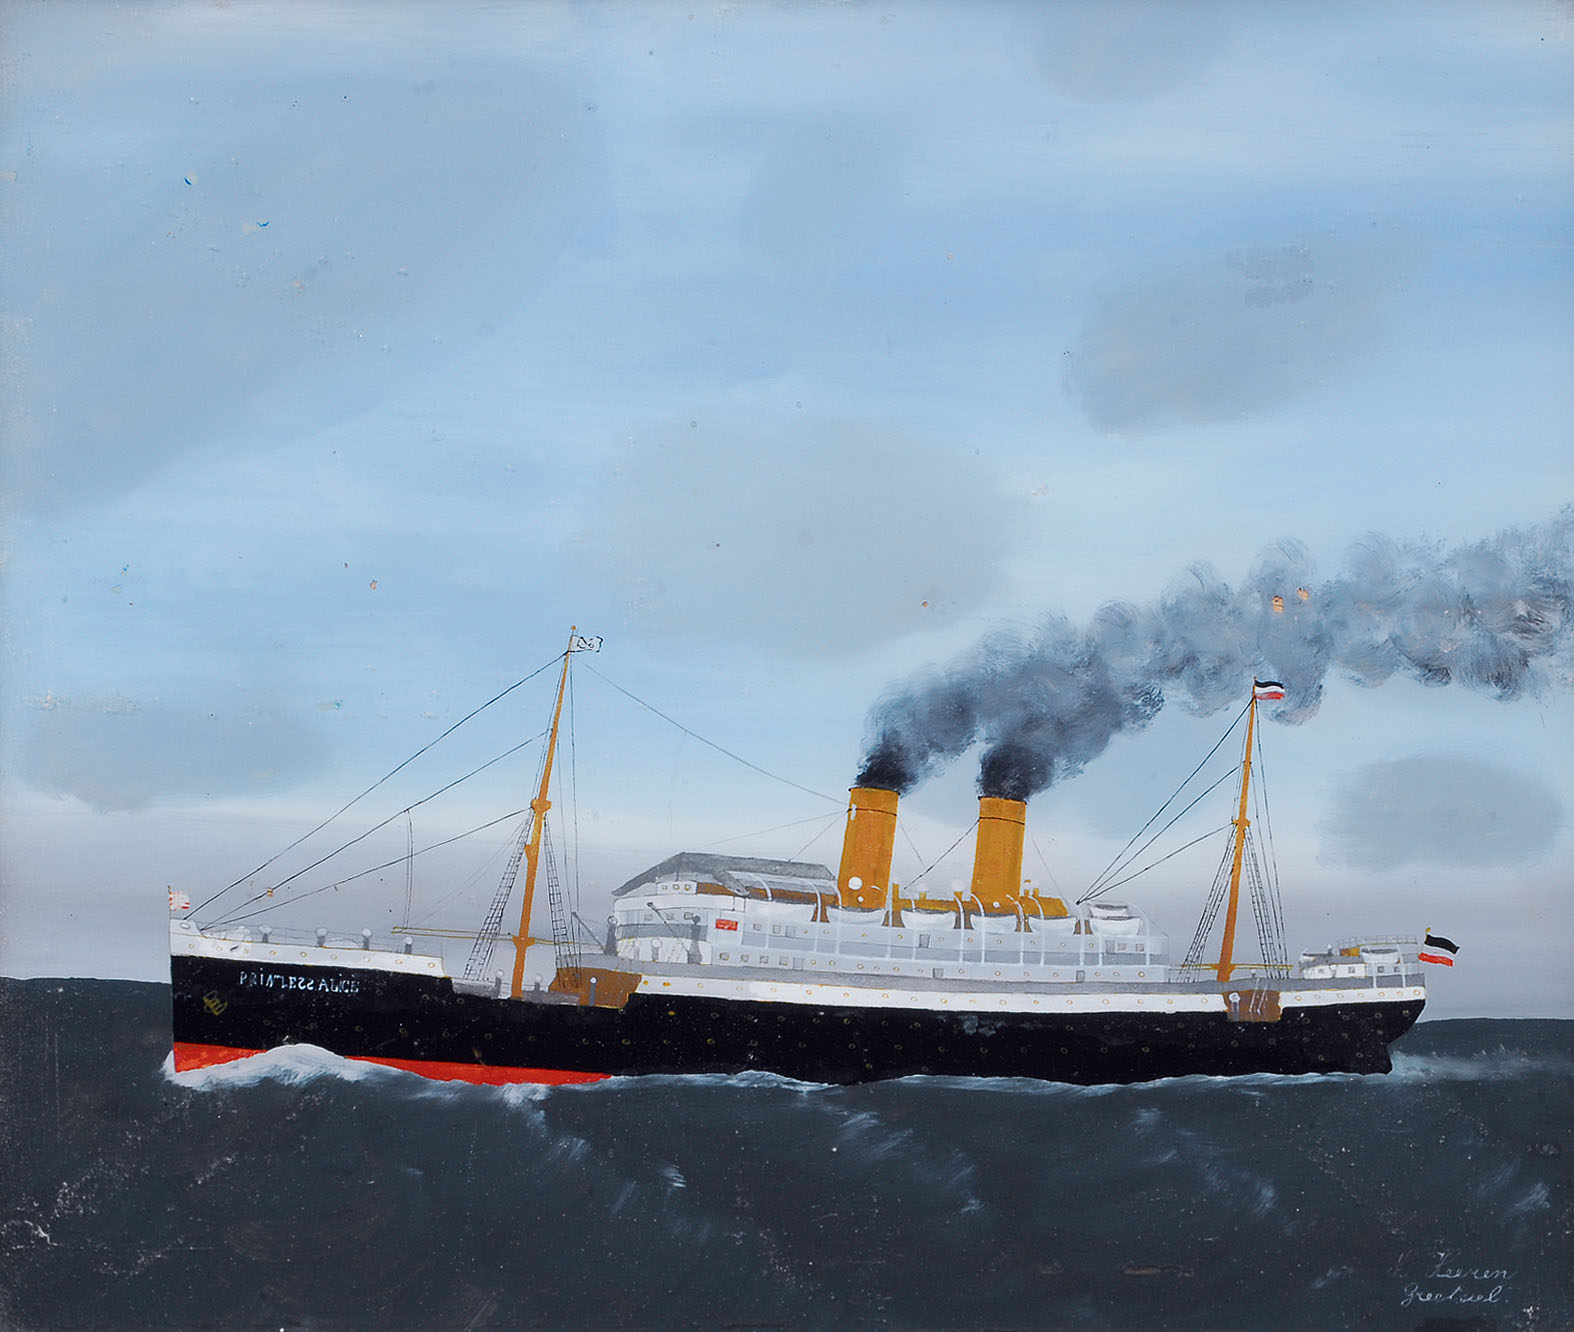 Painting behind glass: The German 'Prinzess Alice' of the Norddeutsche Lloyd